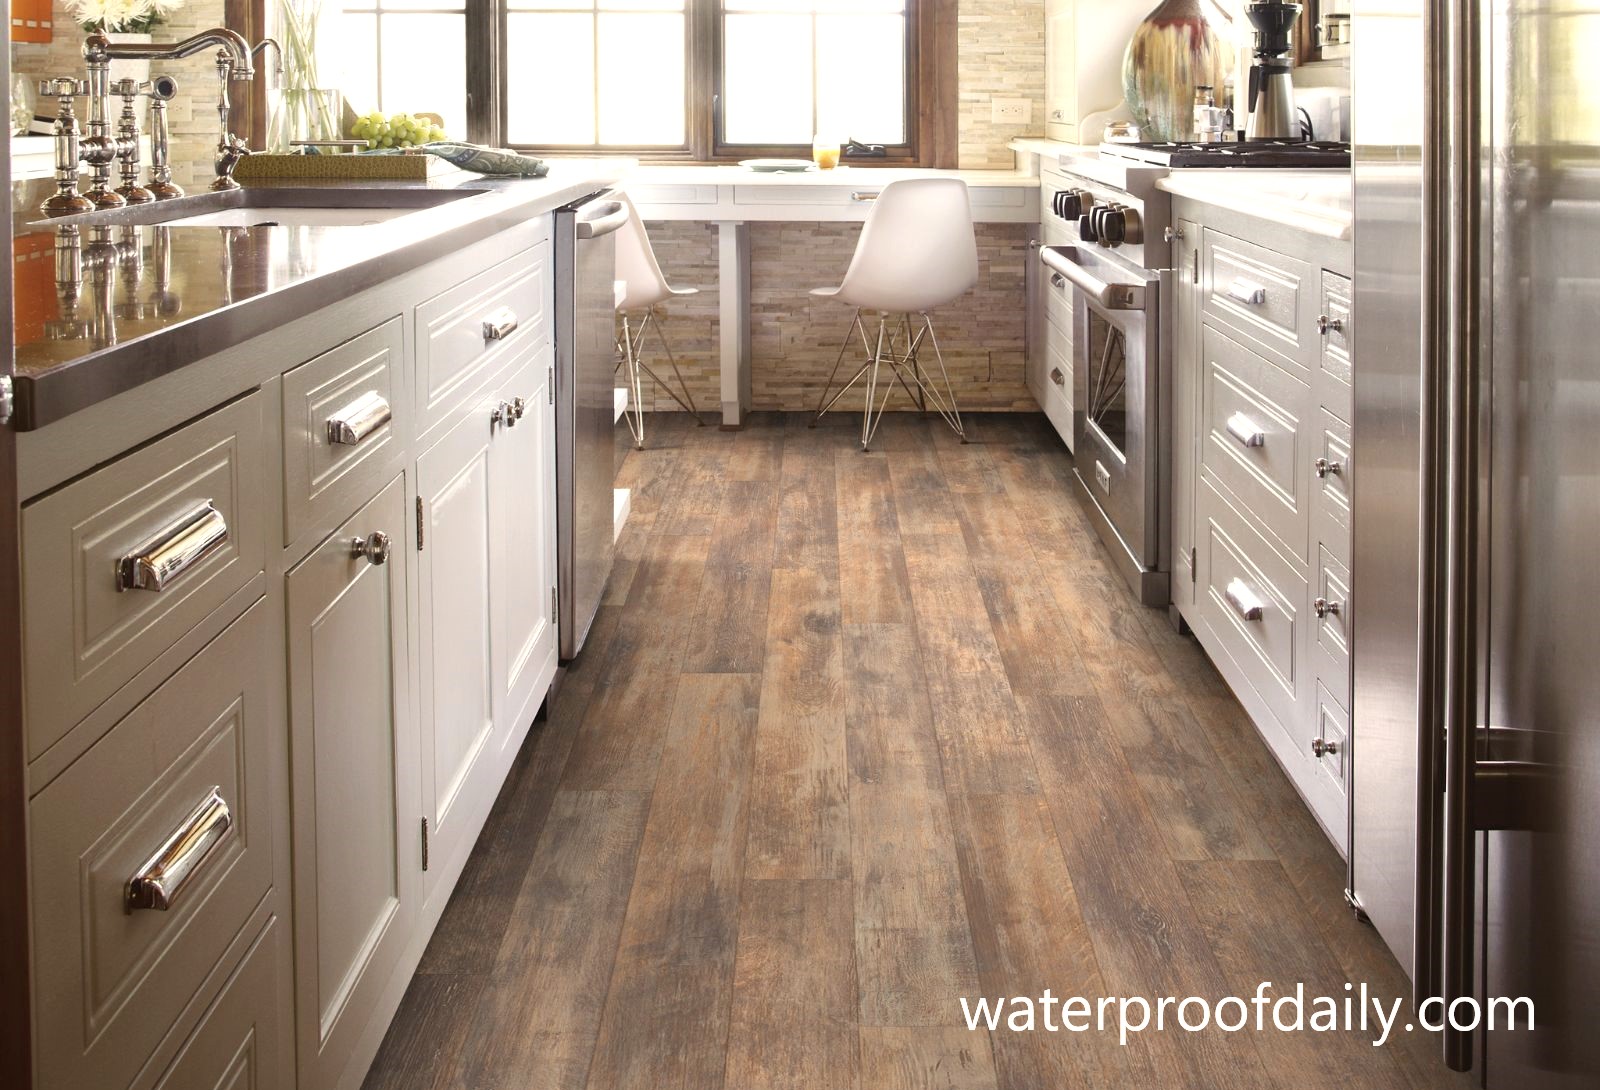 The 12 Best Waterproof Flooring for Kitchen 2021 (Reviews